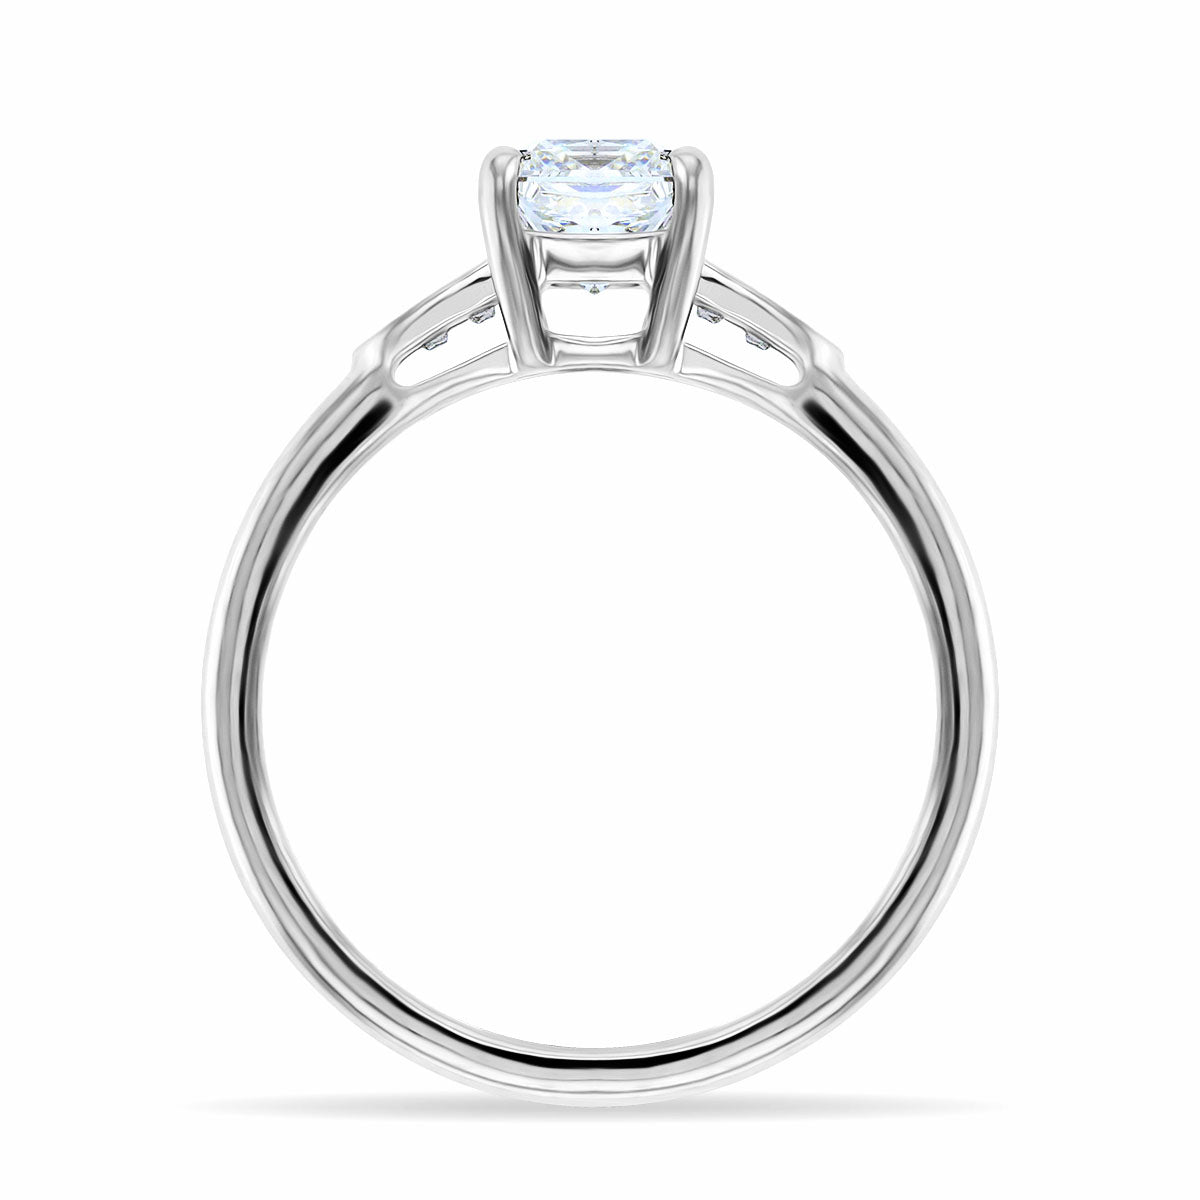 0.97ct Serena Princess Cut Diamond Engagement Ring with Channel Set Shoulders | 18K White Gold